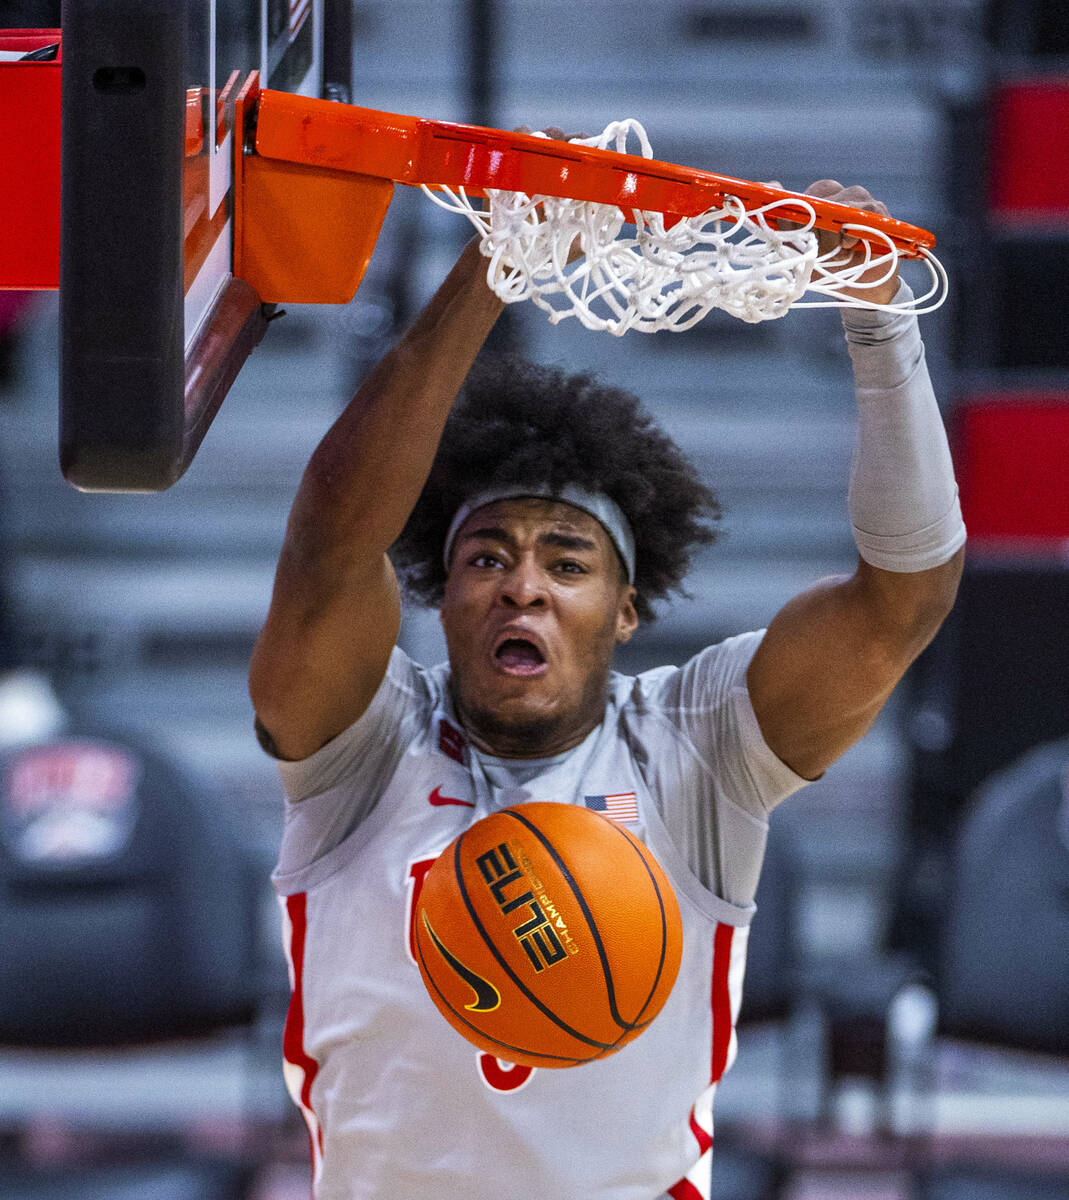 UNLV Rebels forward Rob Whaley Jr. (5) dunks over the Bethesda University Flames during the sec ...